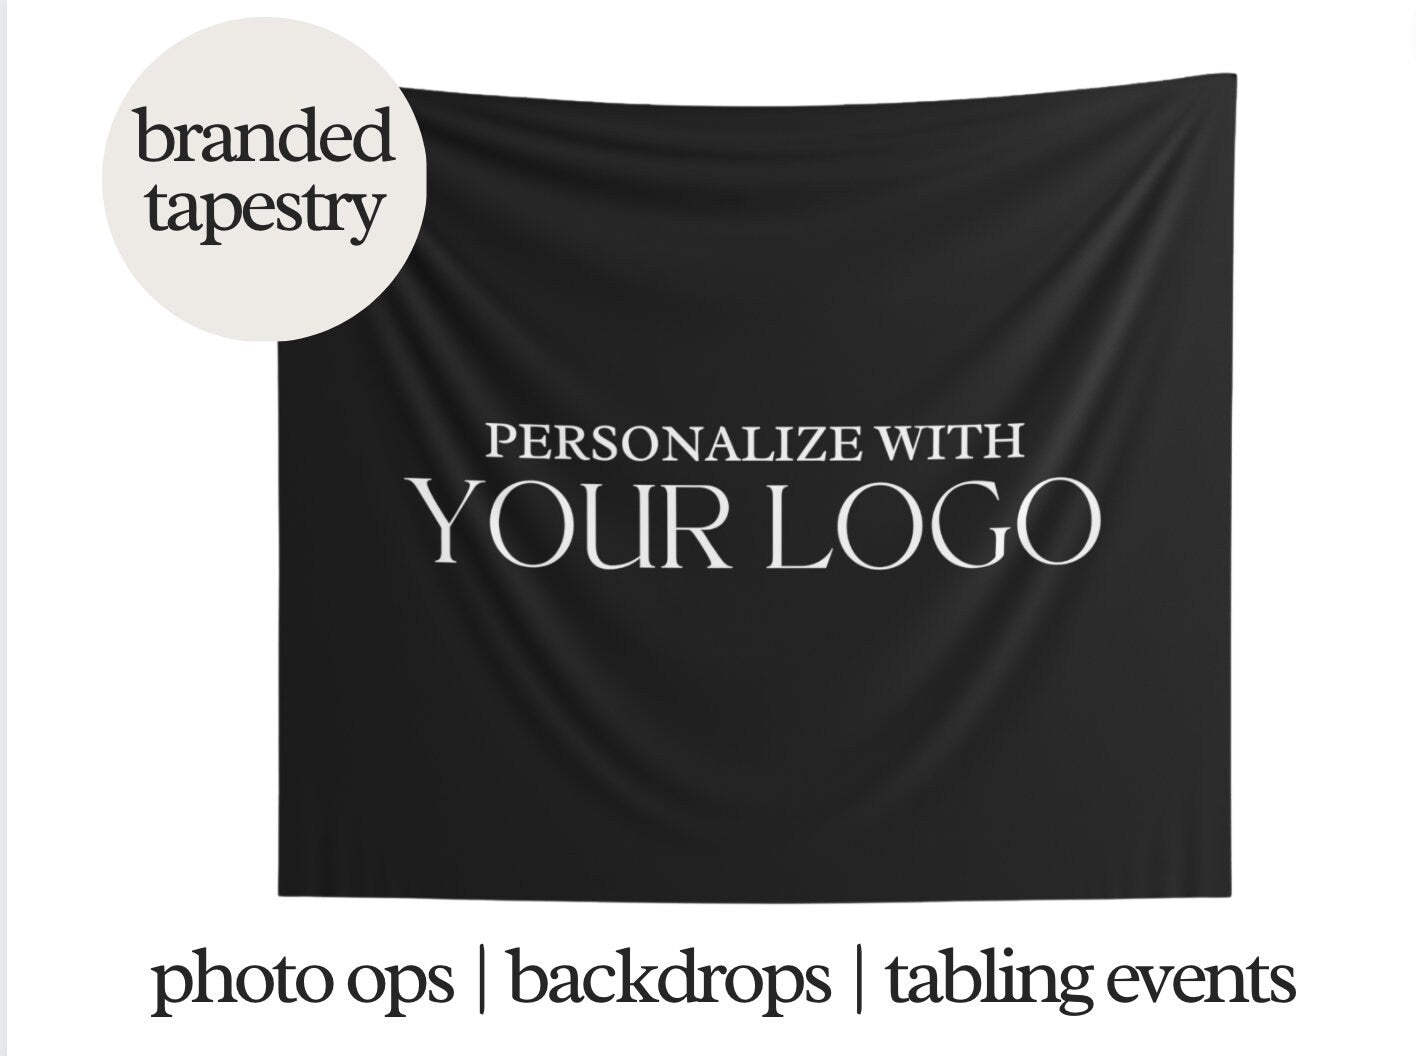 Customized Branded Tapestry, Photo Op Backdrop, Salon Decor, Branded Wall Art. Tabling Events, Photo Booth Backdrop For Salon, Logo Banner